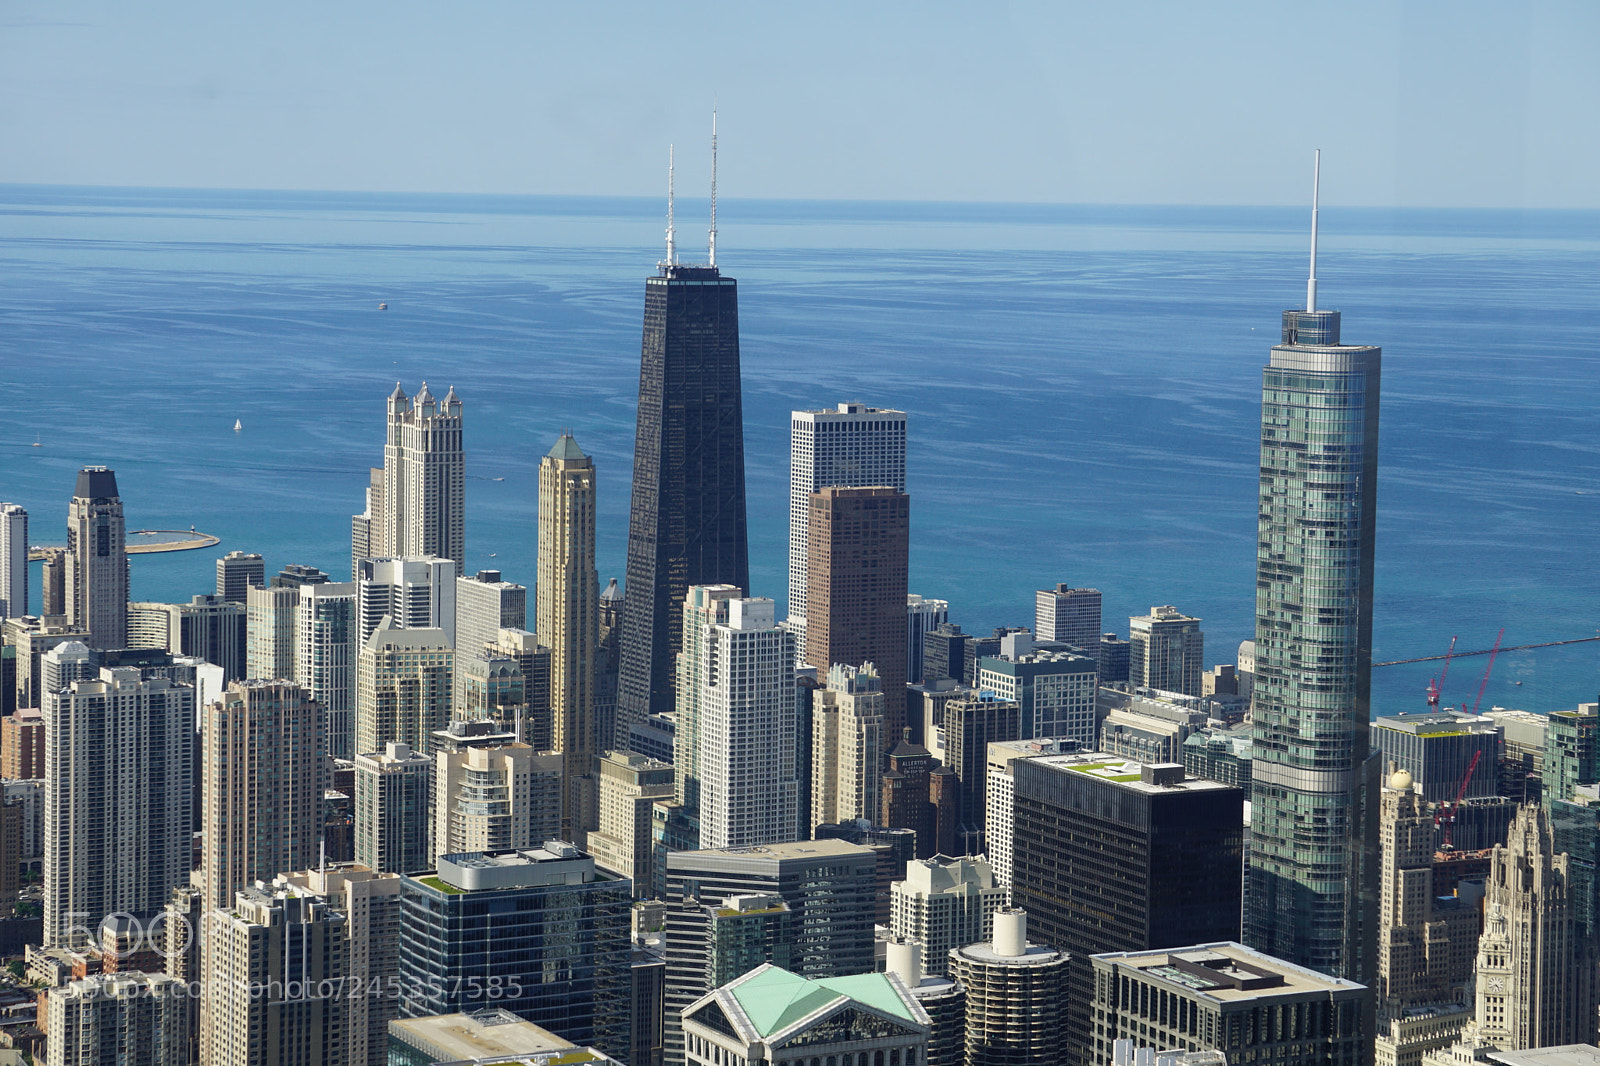 Sony a6000 sample photo. Willis tower skydeck photography